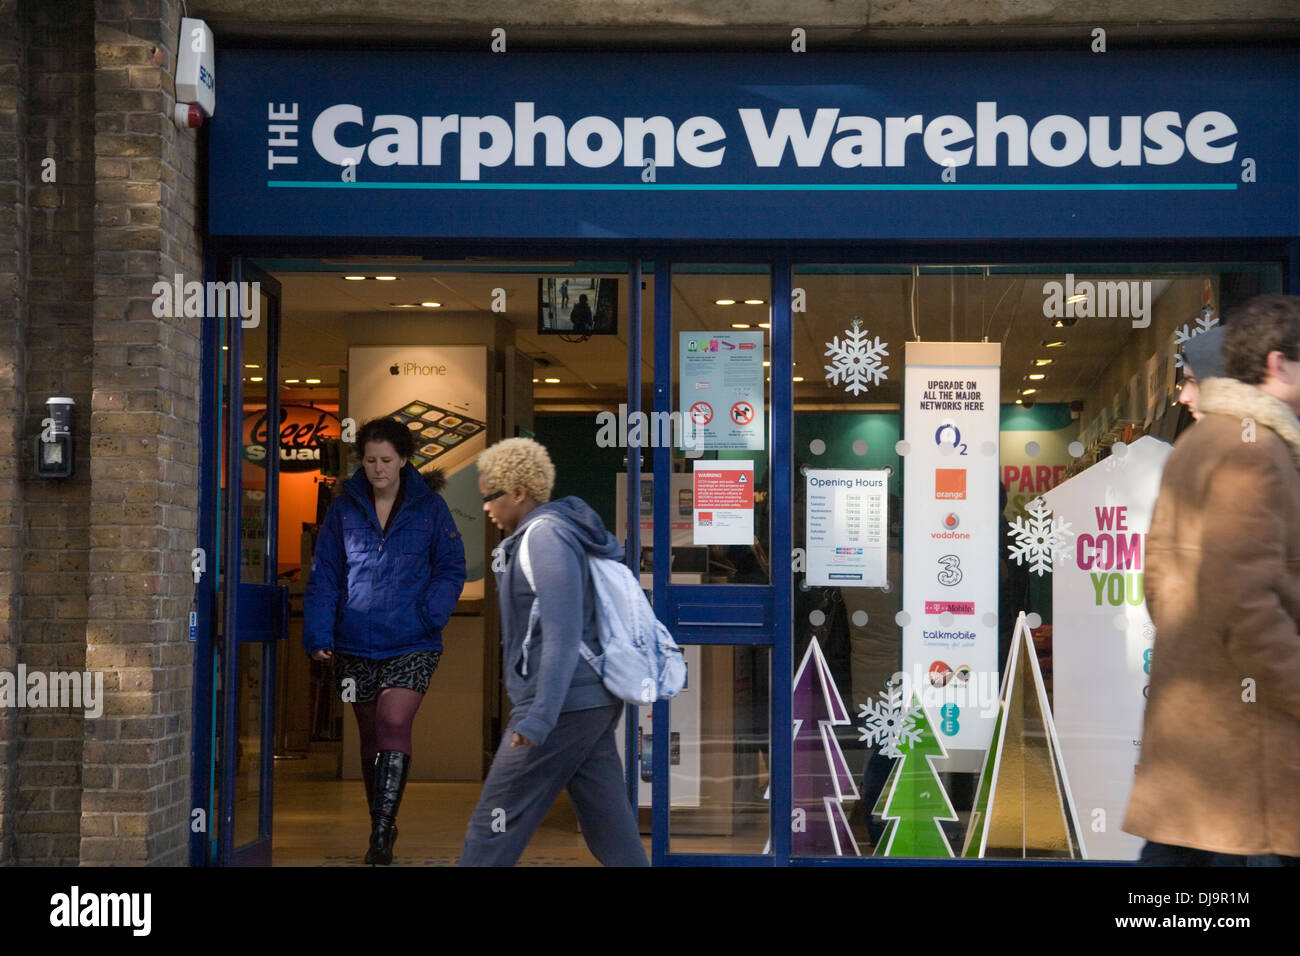 Carphone Warehouse shop front on high street with people walking past Stock Photo